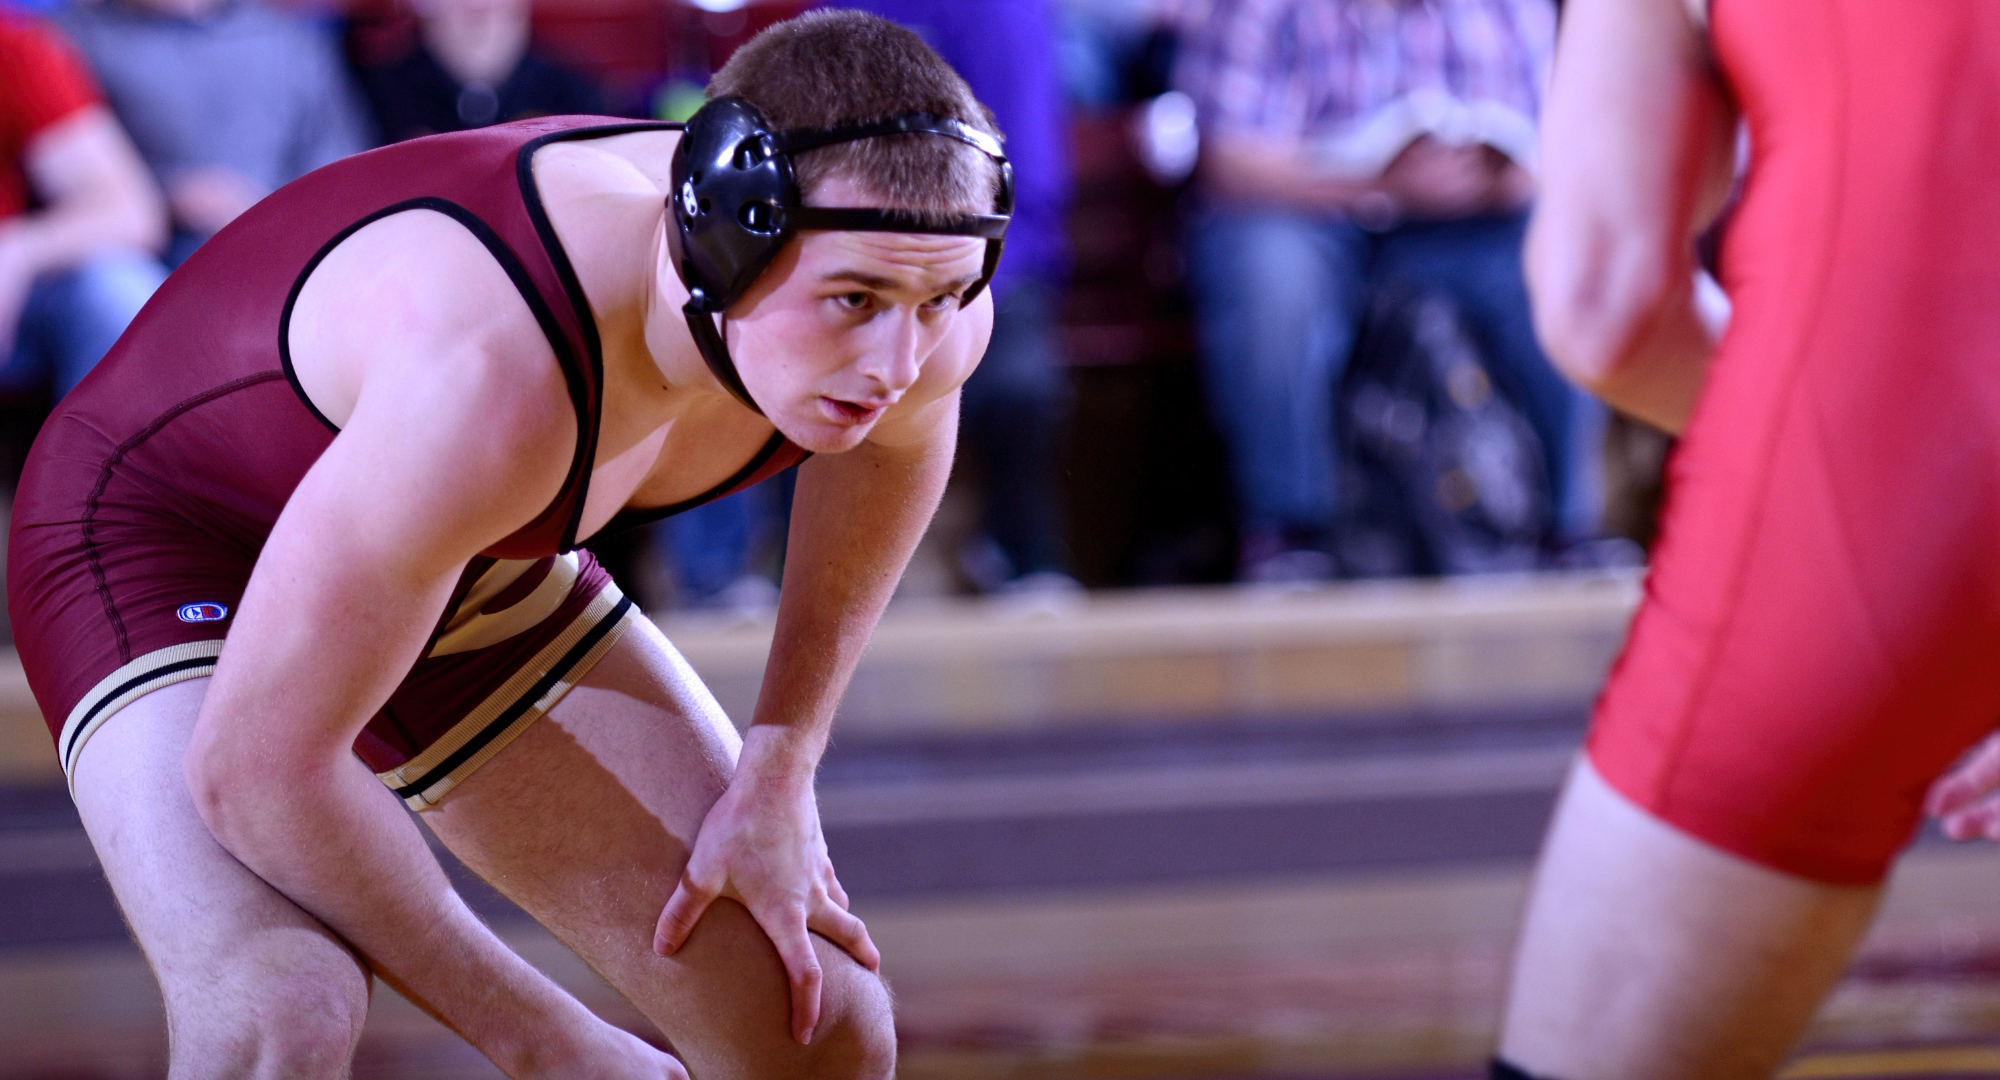 Sophomore Nick Gravdahl won six straight matches and finished third at 157 at the Dakota Wesleyan Open.